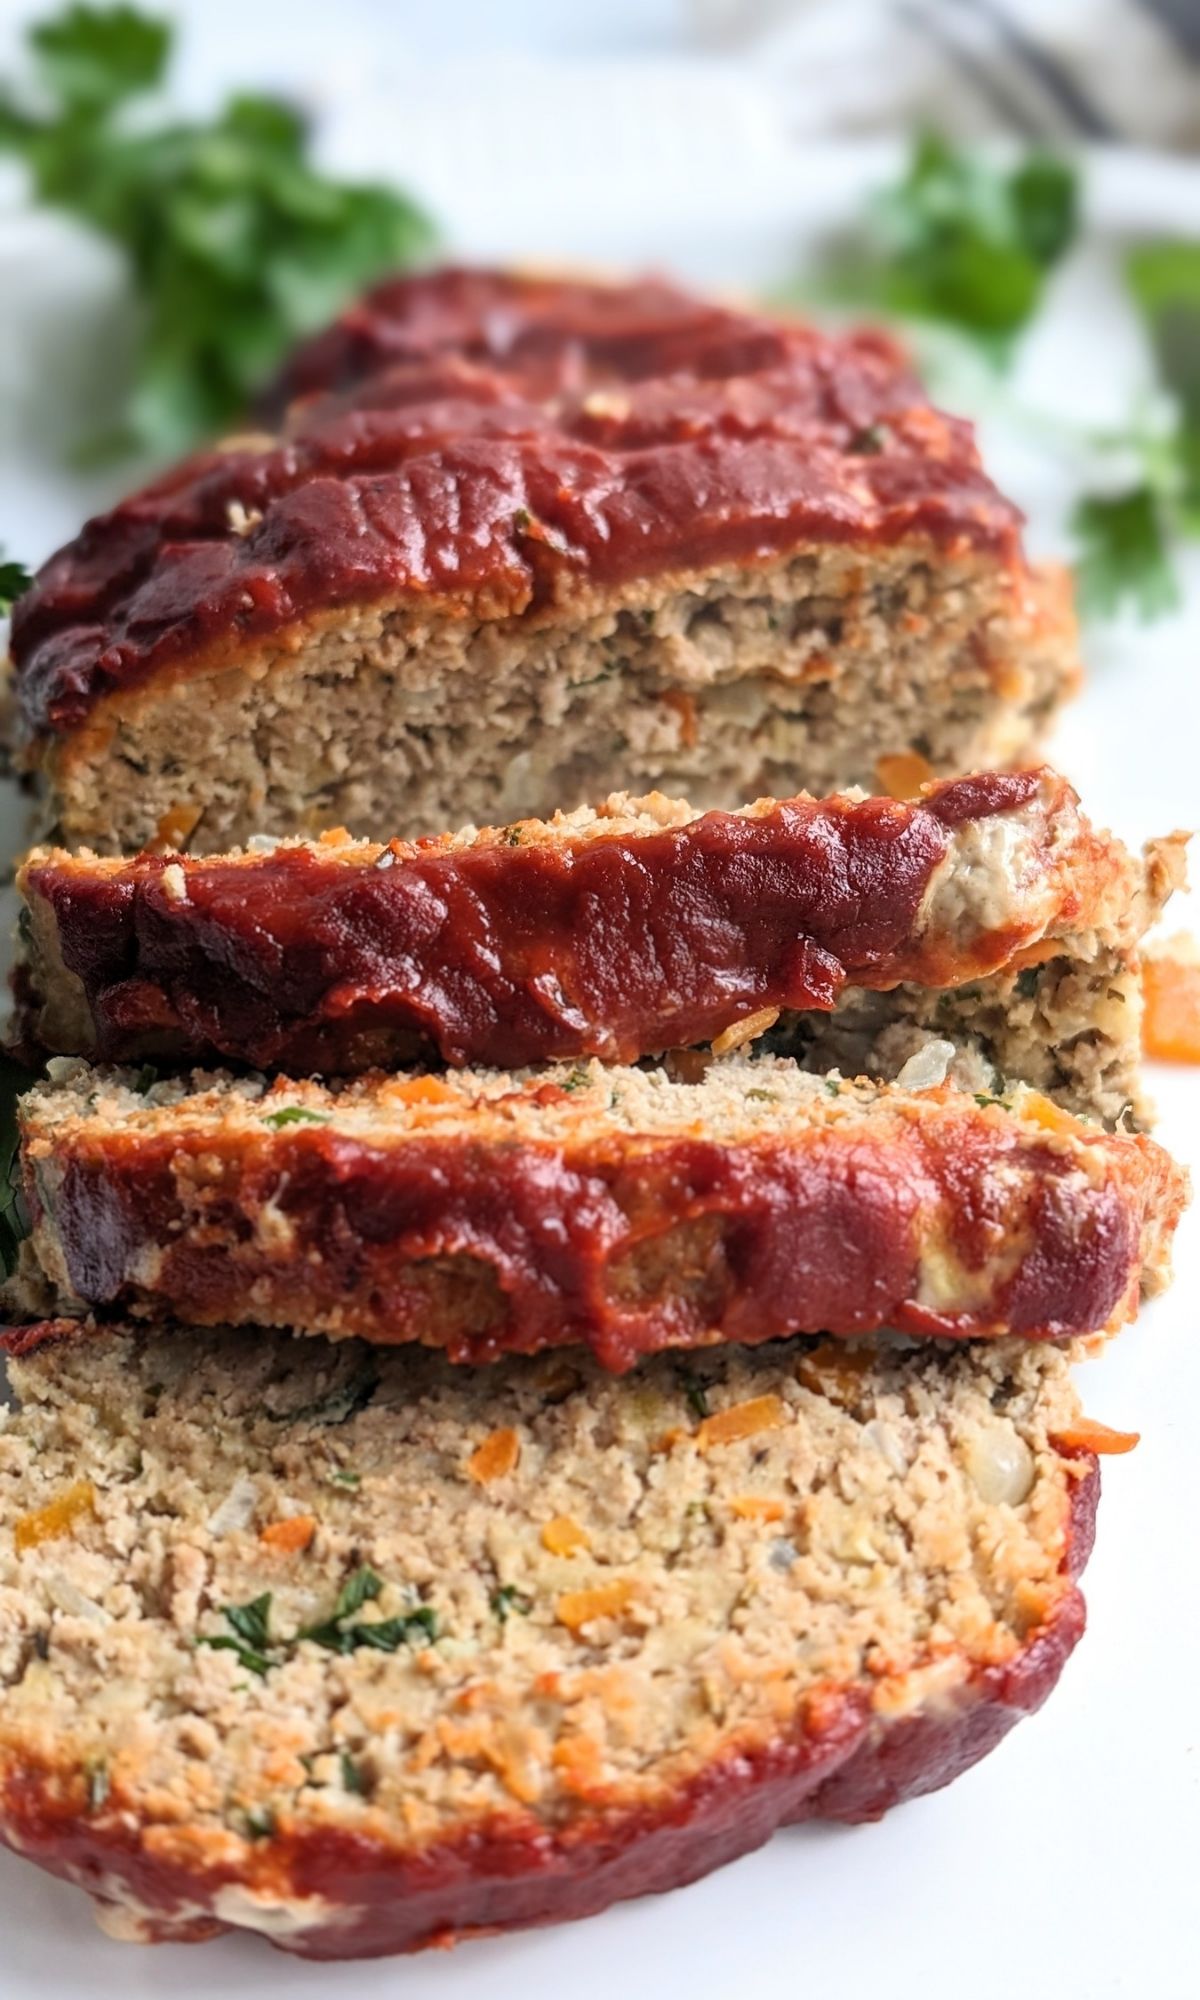 low salt meatloaf recipe easy low sodium dinner ideas with ground meat or ground turkey